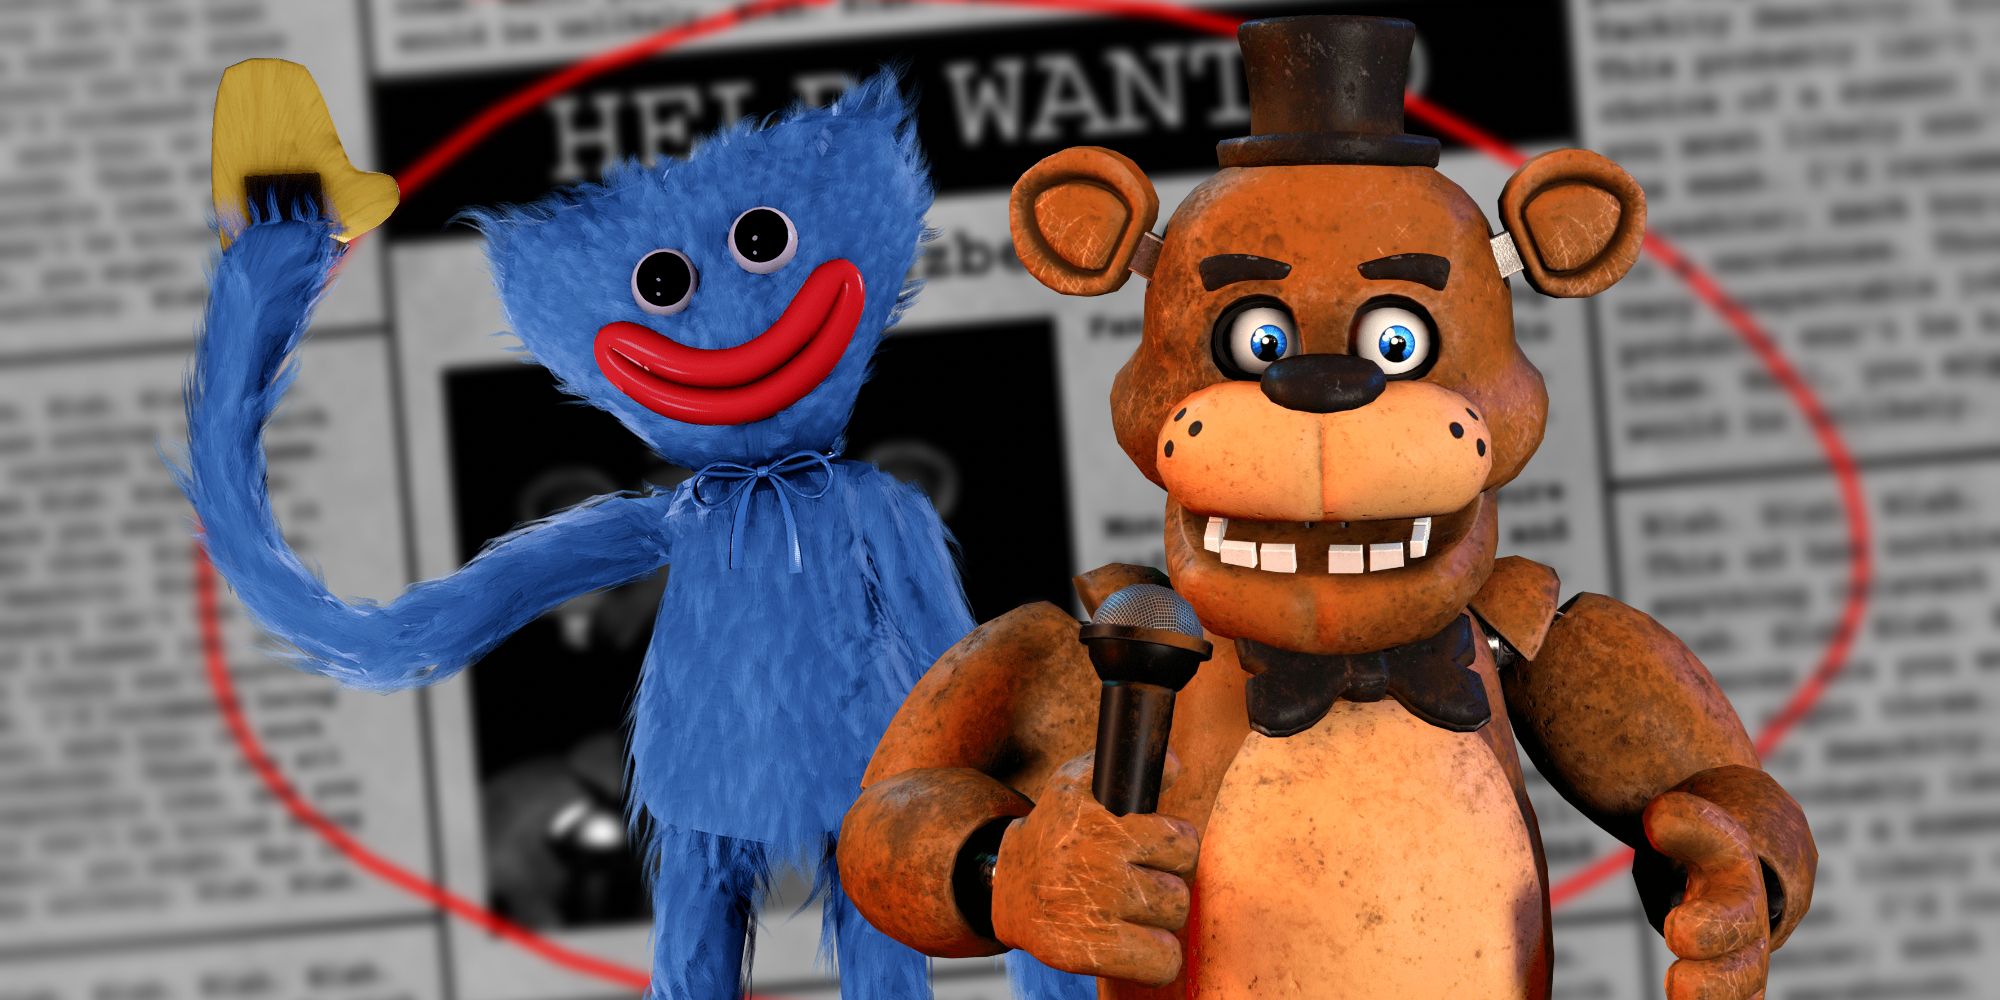 Freddy Fazbear from FNAF and Huggy Wuggy from Poppy Playtime in front of a newspaper collectible from Five Nights At Freddy's.